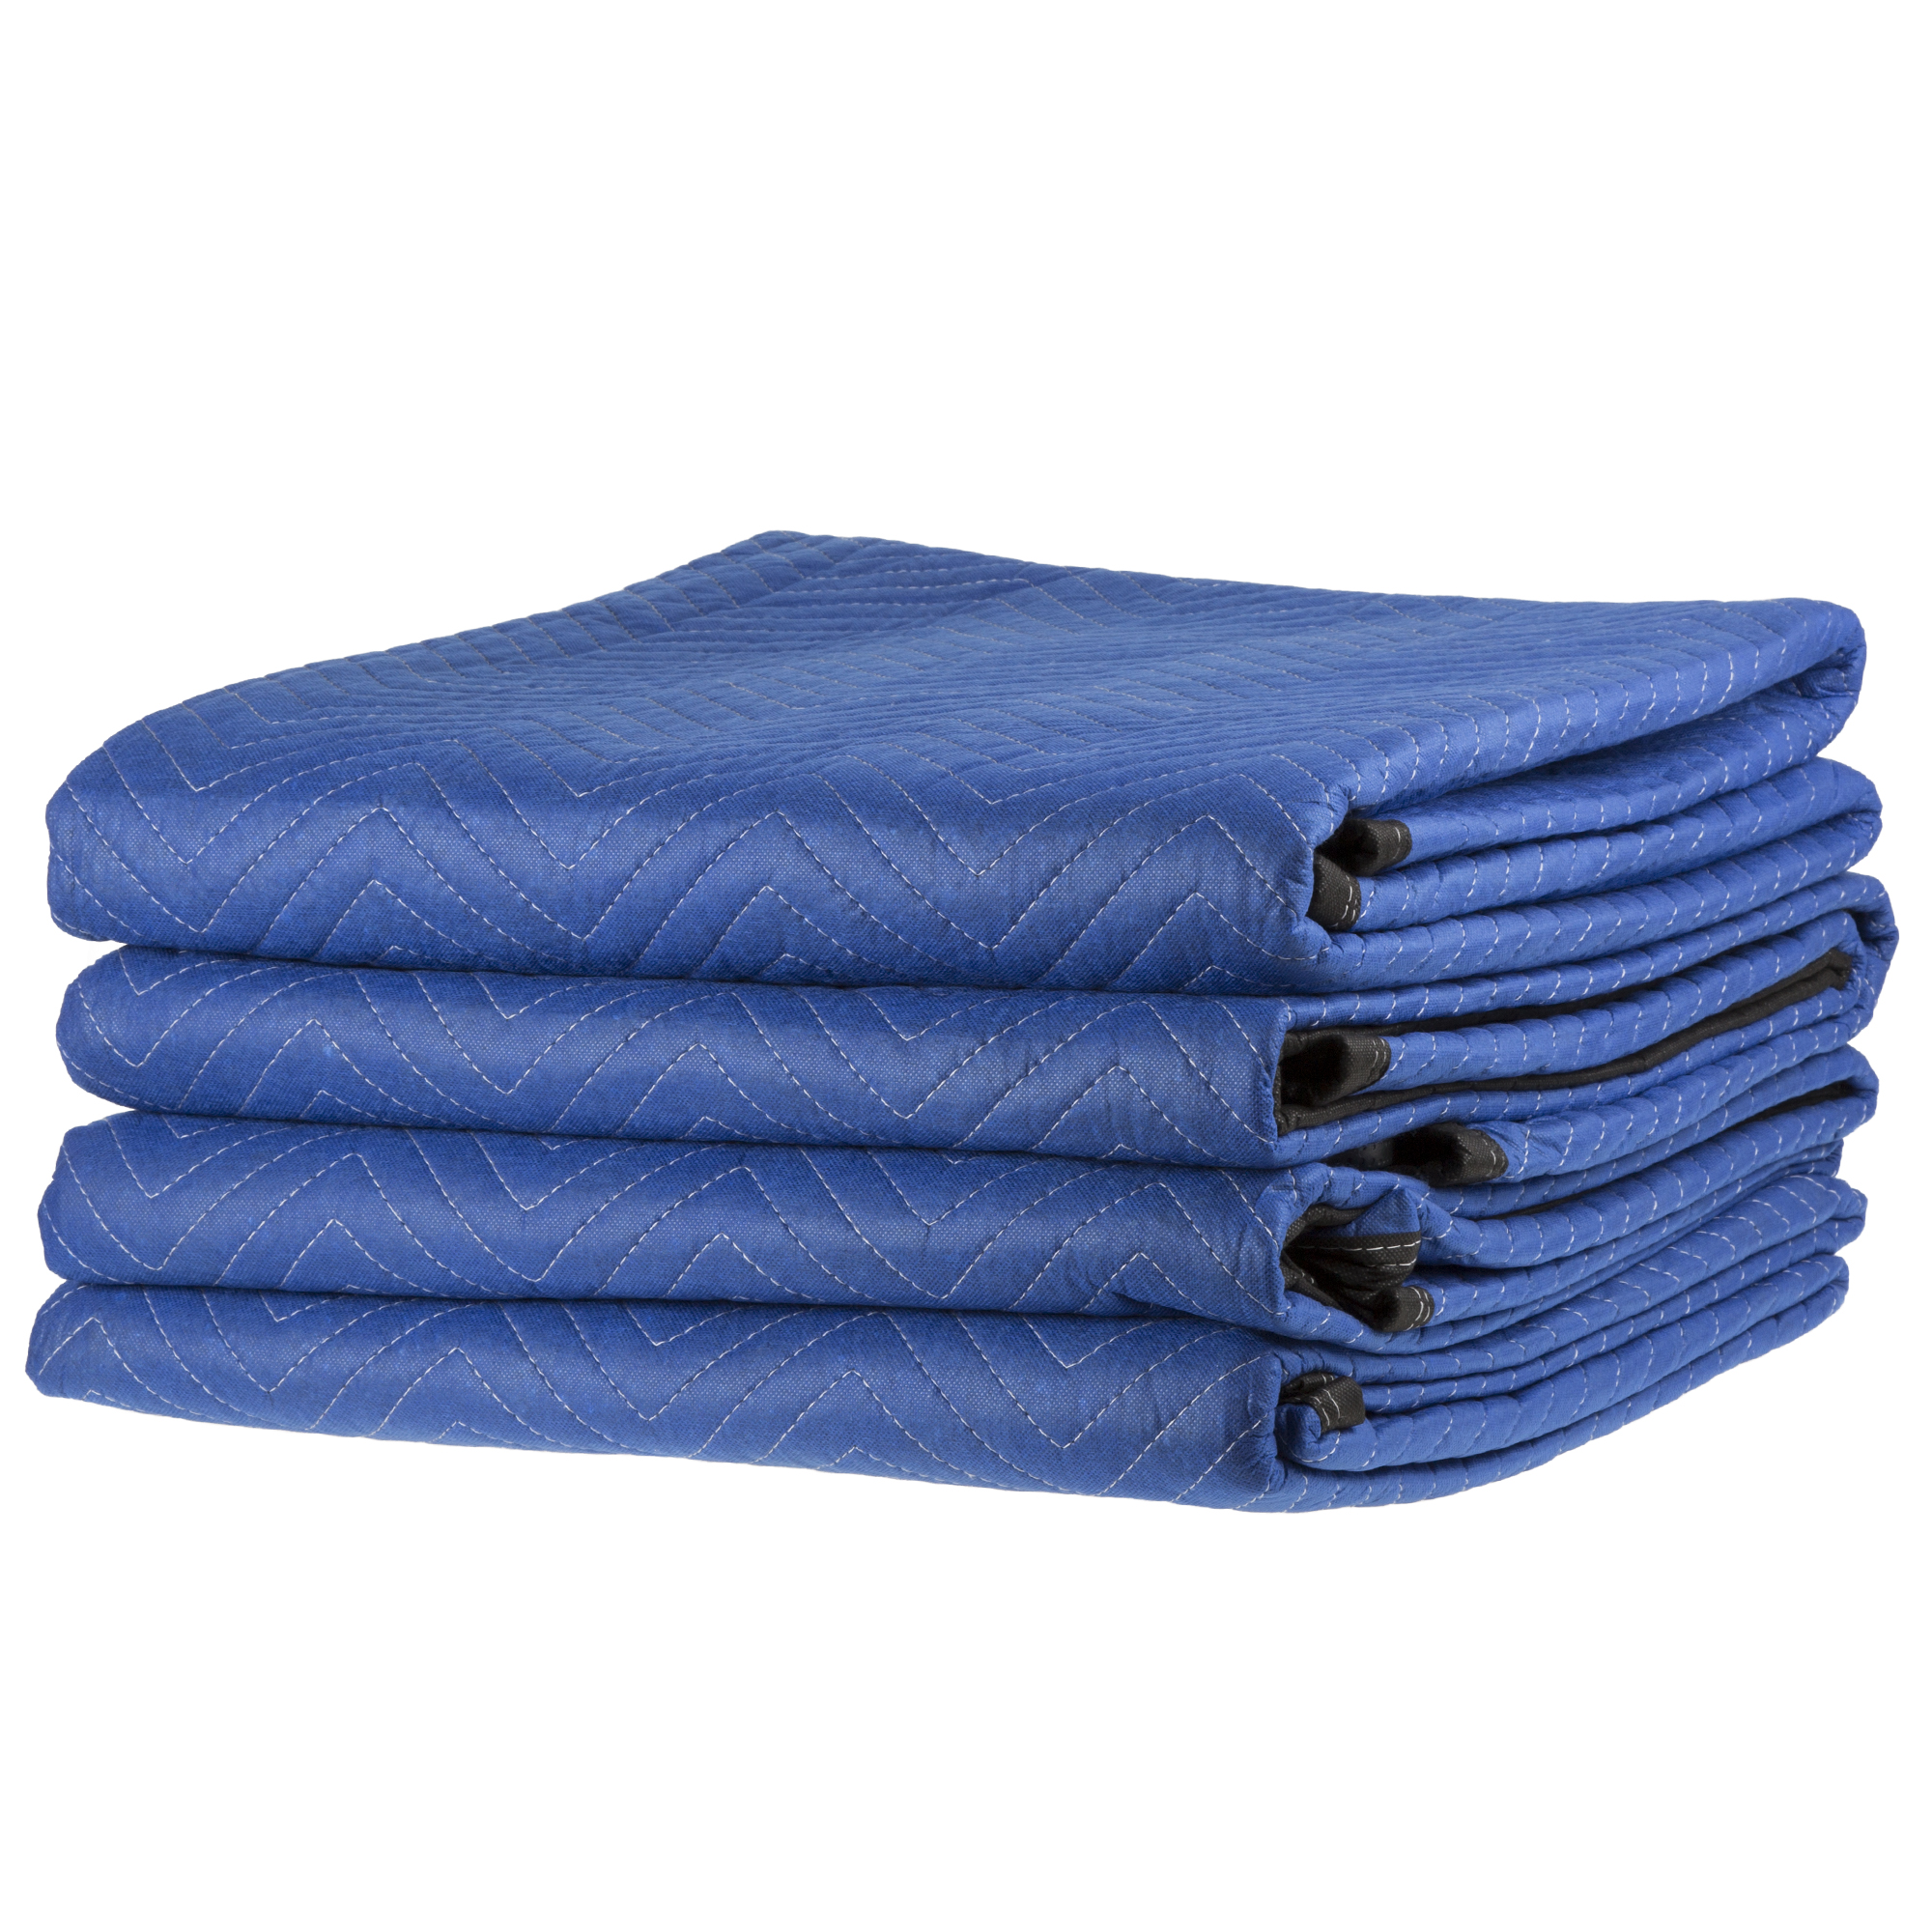 STALWART Cotton-Filled Moving Blanket – Heavy-Duty Drop Cloth to Cover Furniture, Appliances and Cushion Moving Boxes – Blue, 73.5" x 80", Set of 1 - image 4 of 5